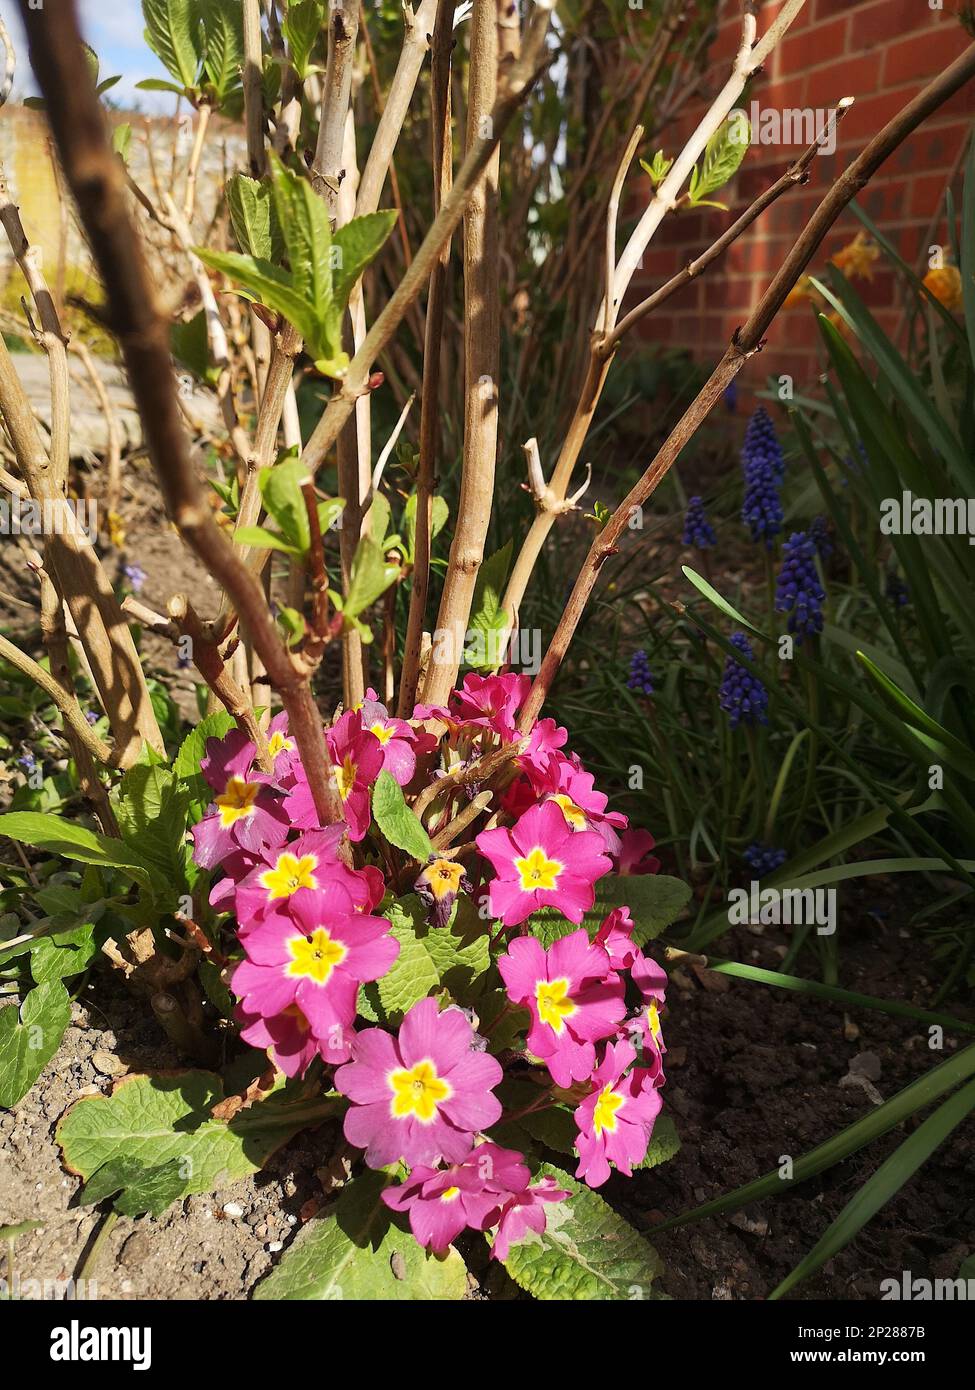 Detail of a group of pink and yellow polyanthus flowers in full bloom. Stock Photo